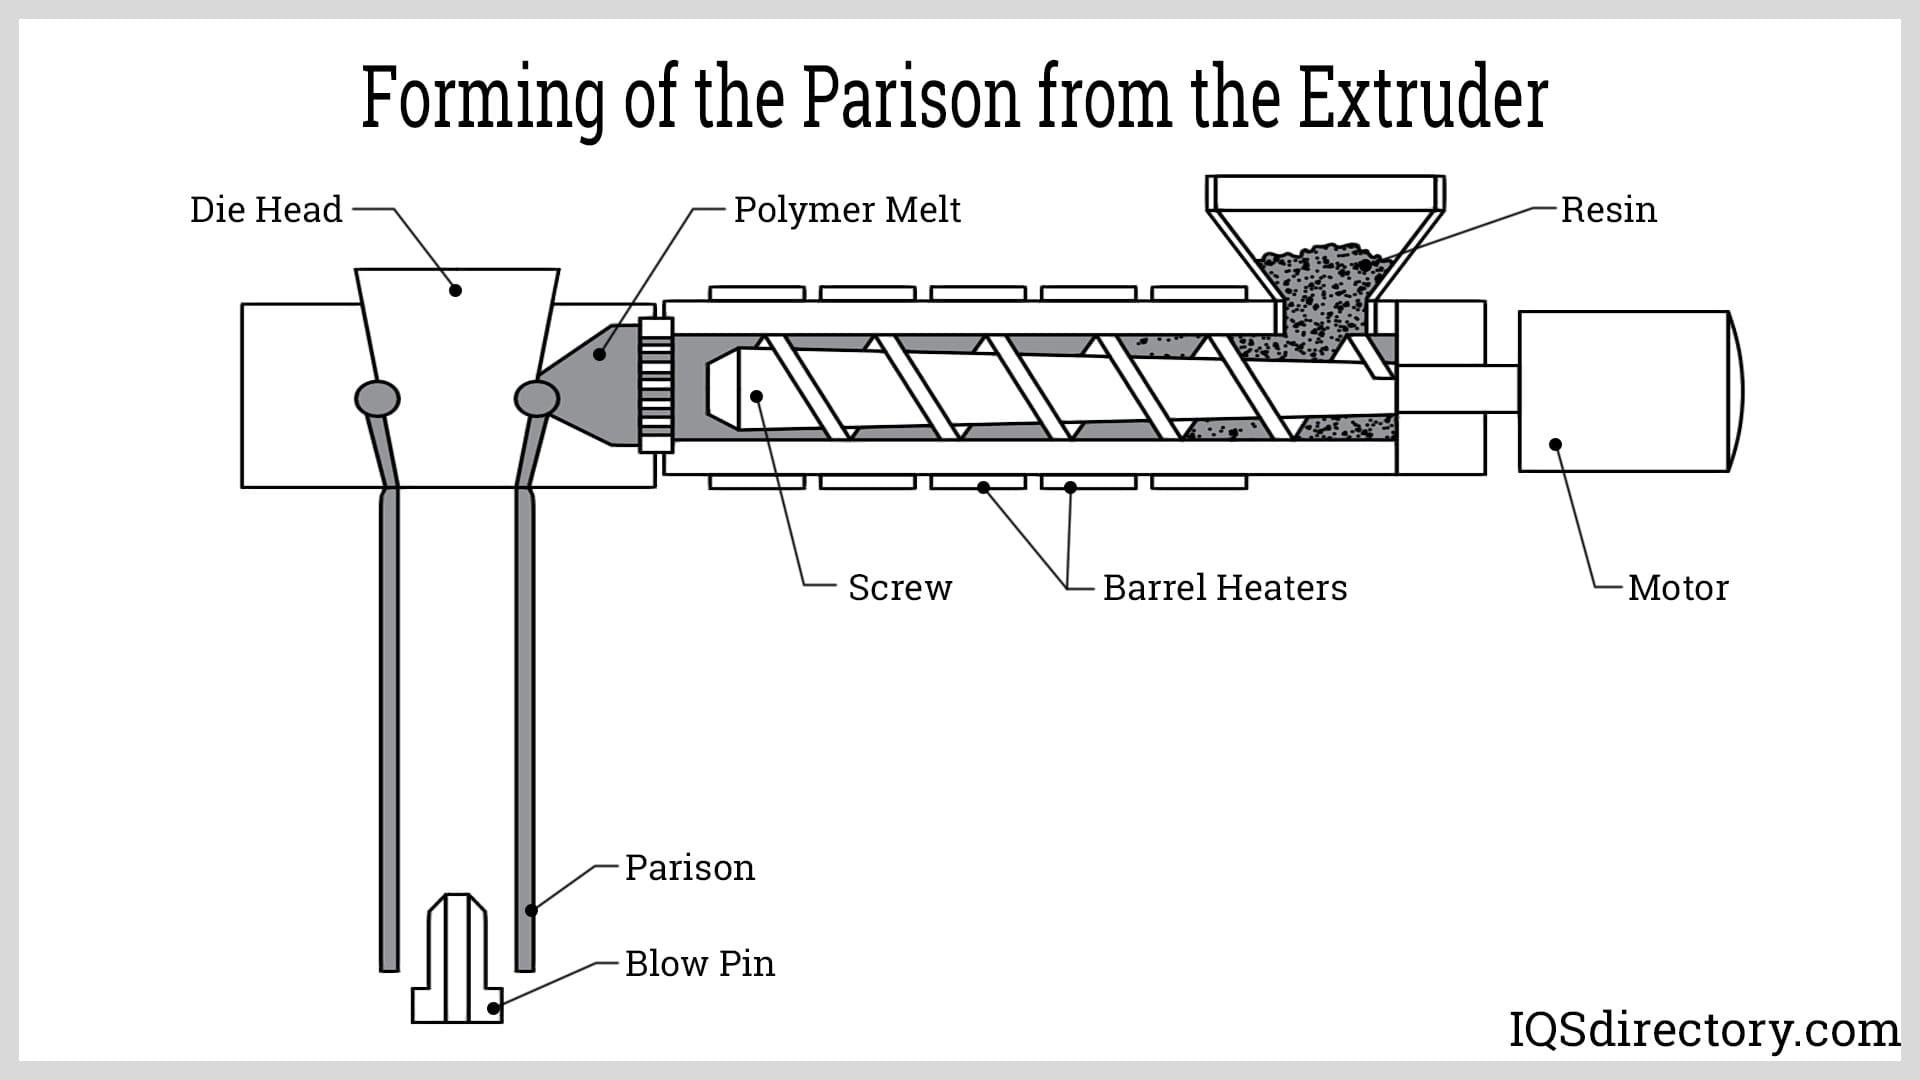 Forming of the Parison from the Extruder